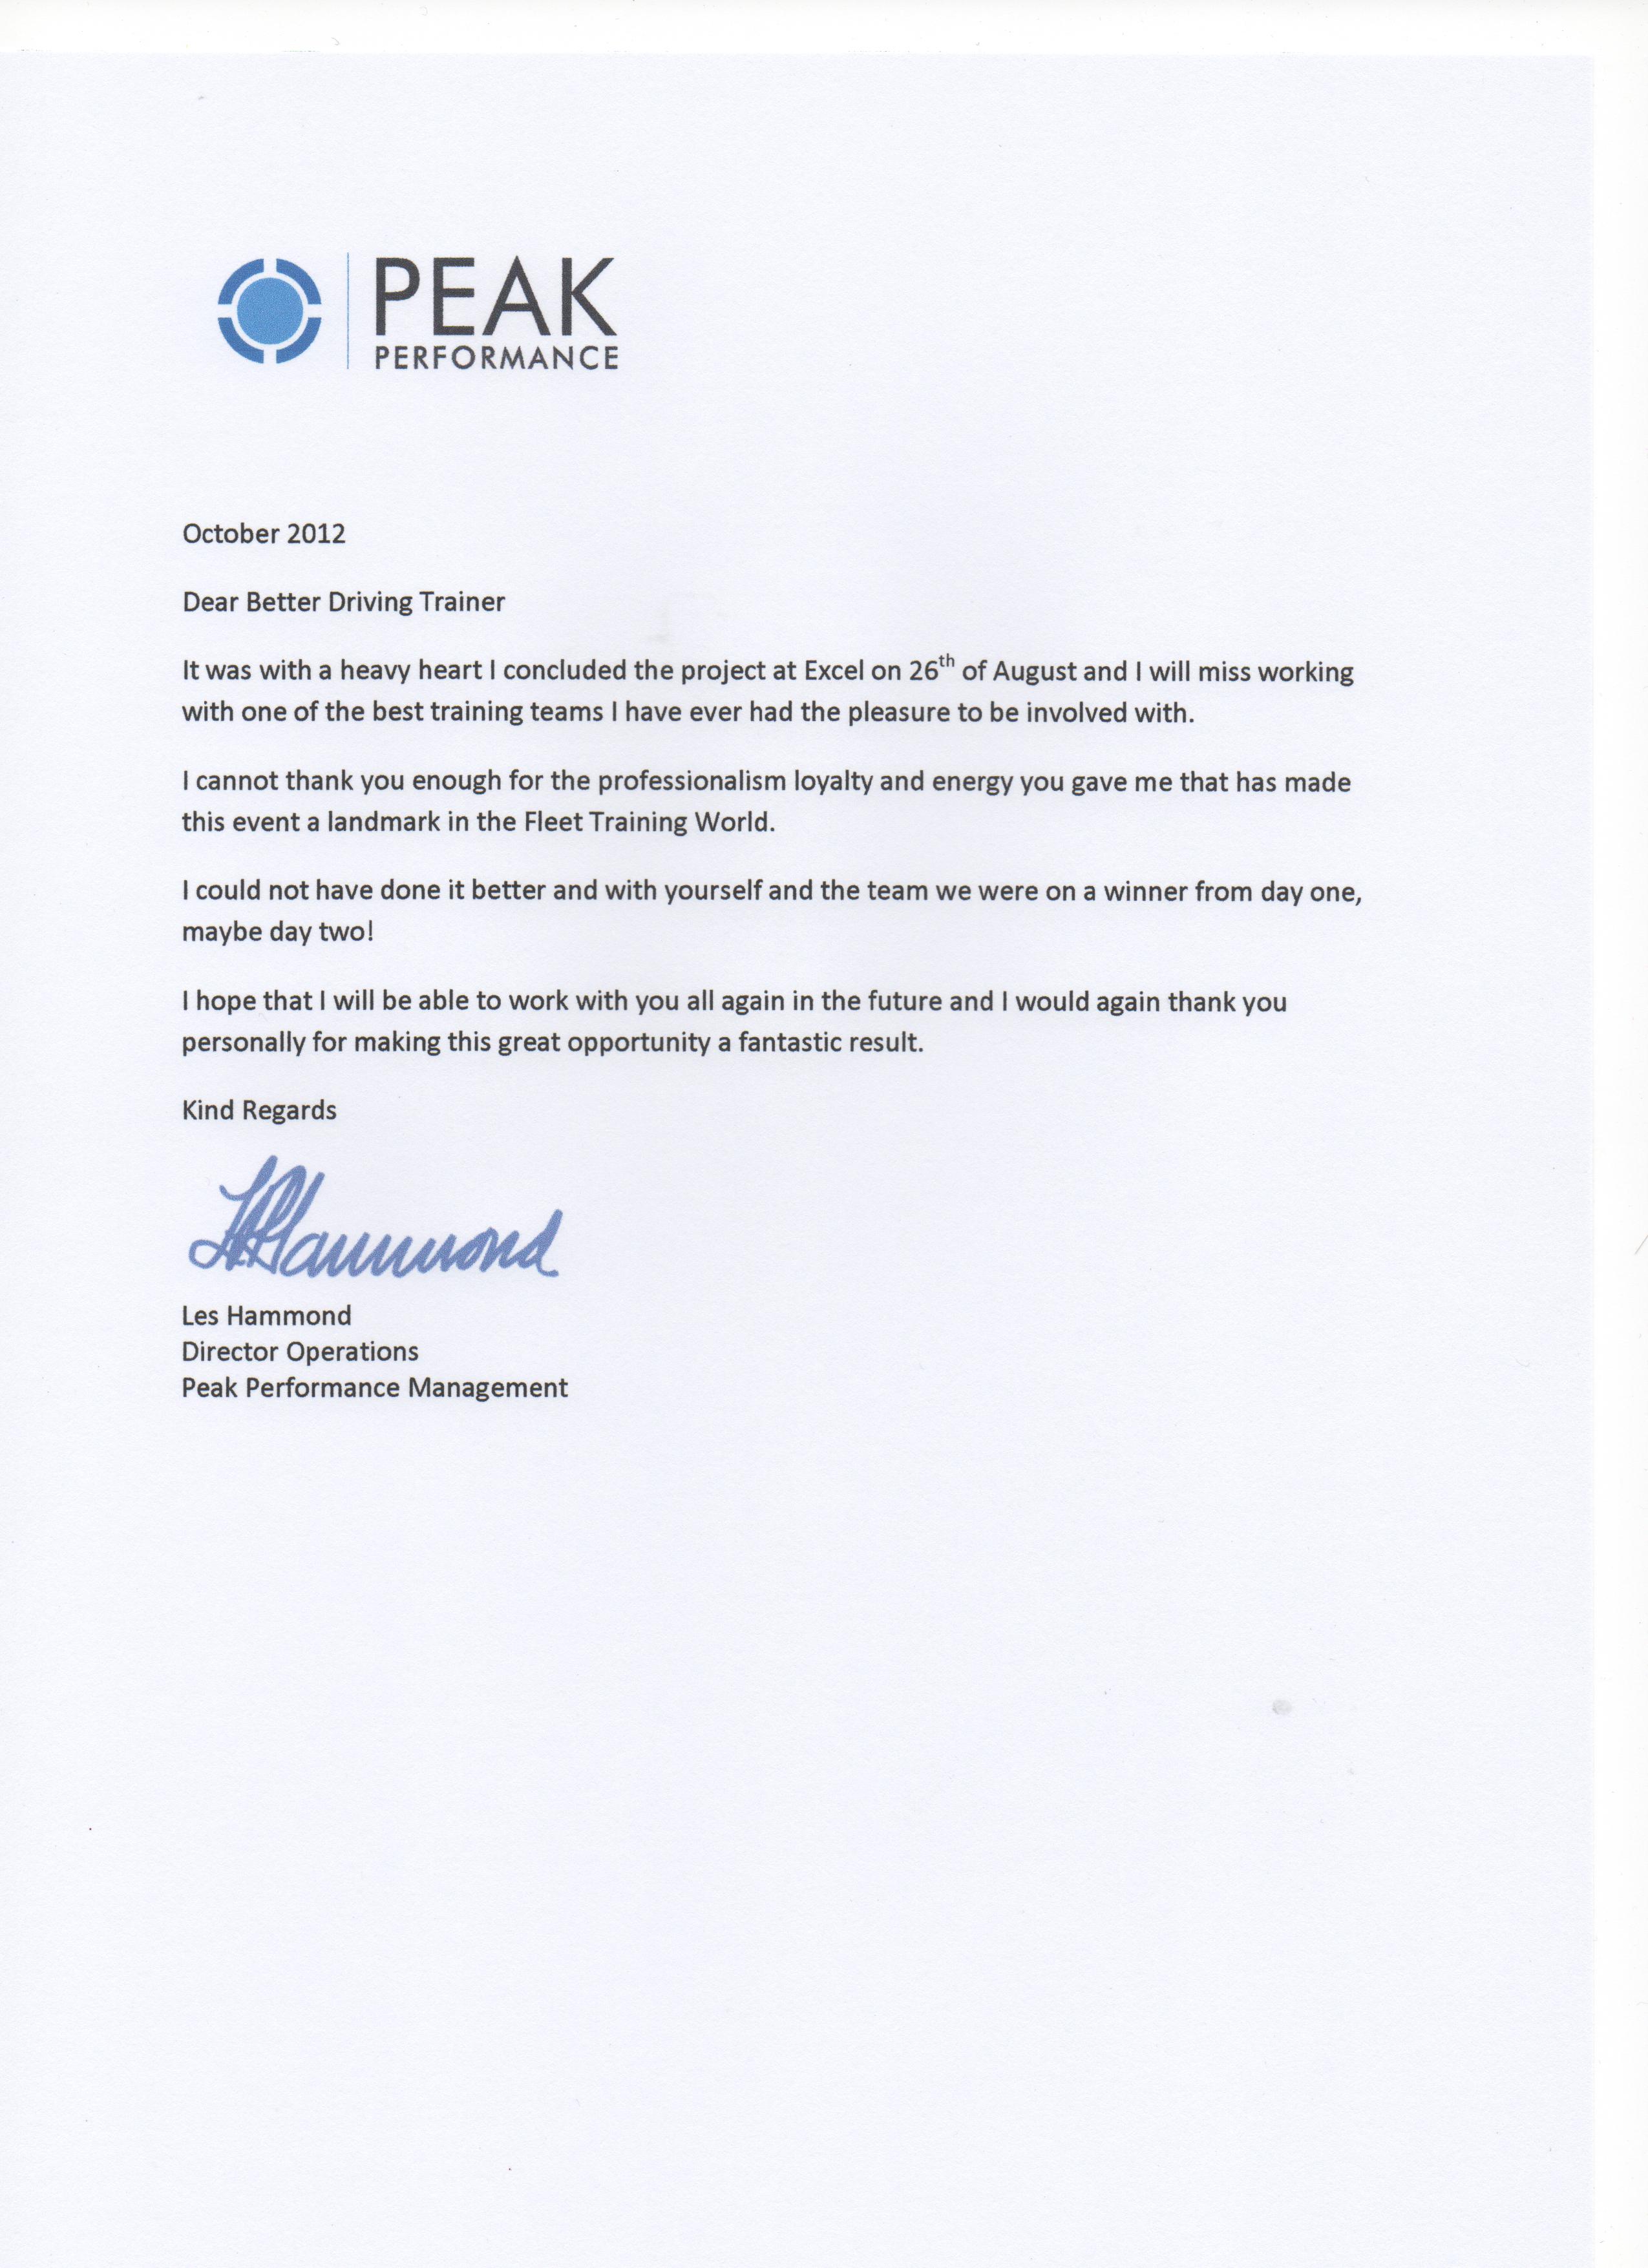 thank you letter for training opportunity best sales